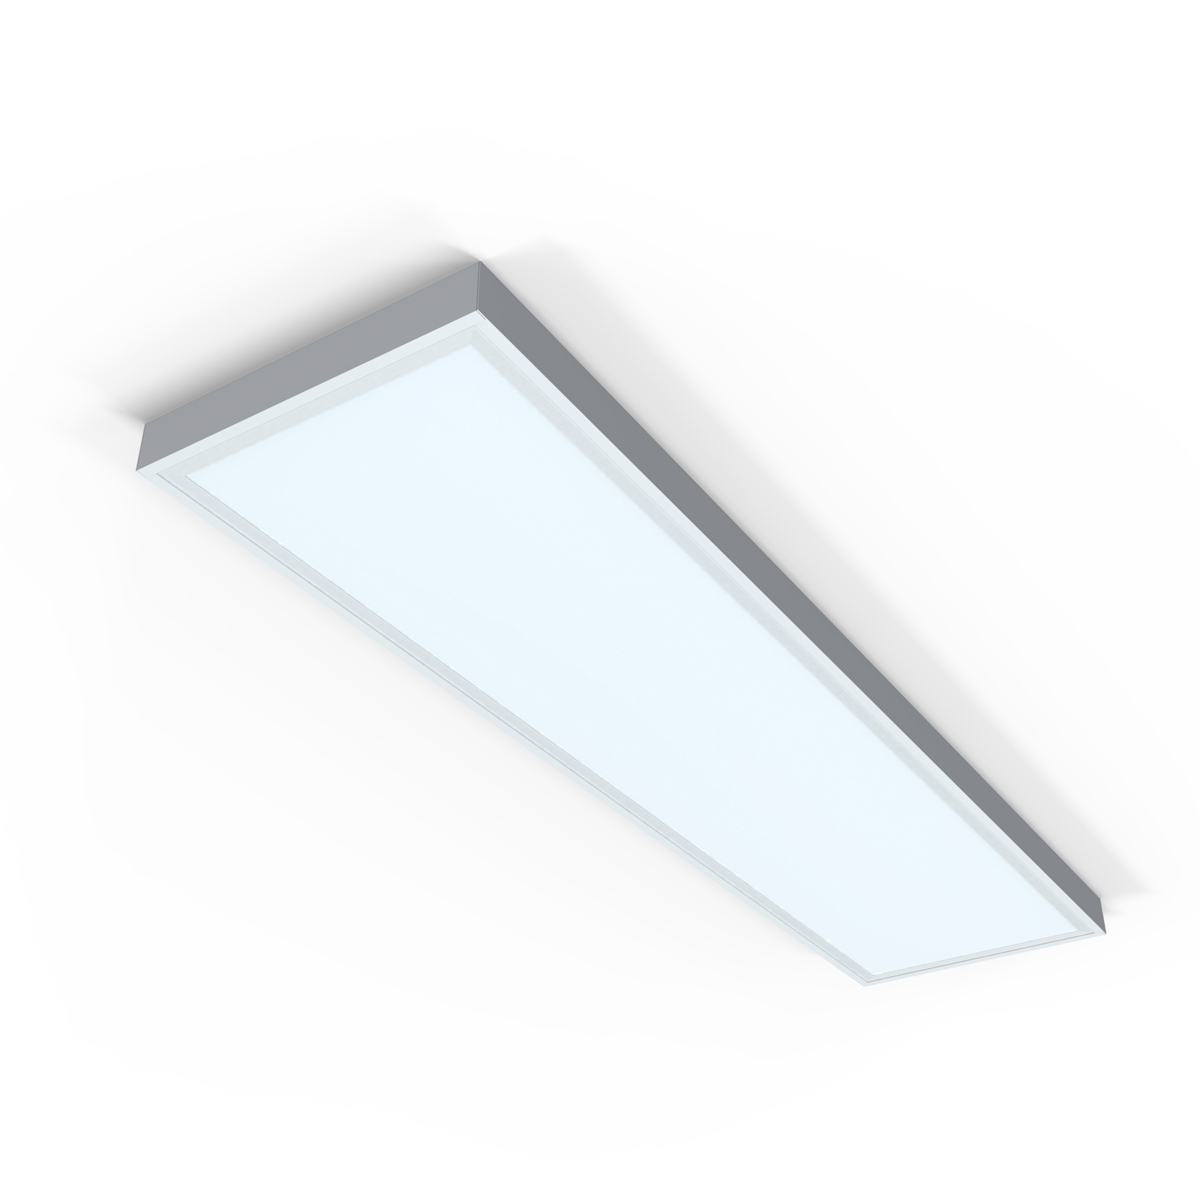 View 1200x300mm Surface Mounting Frame For LED Panel Lights information